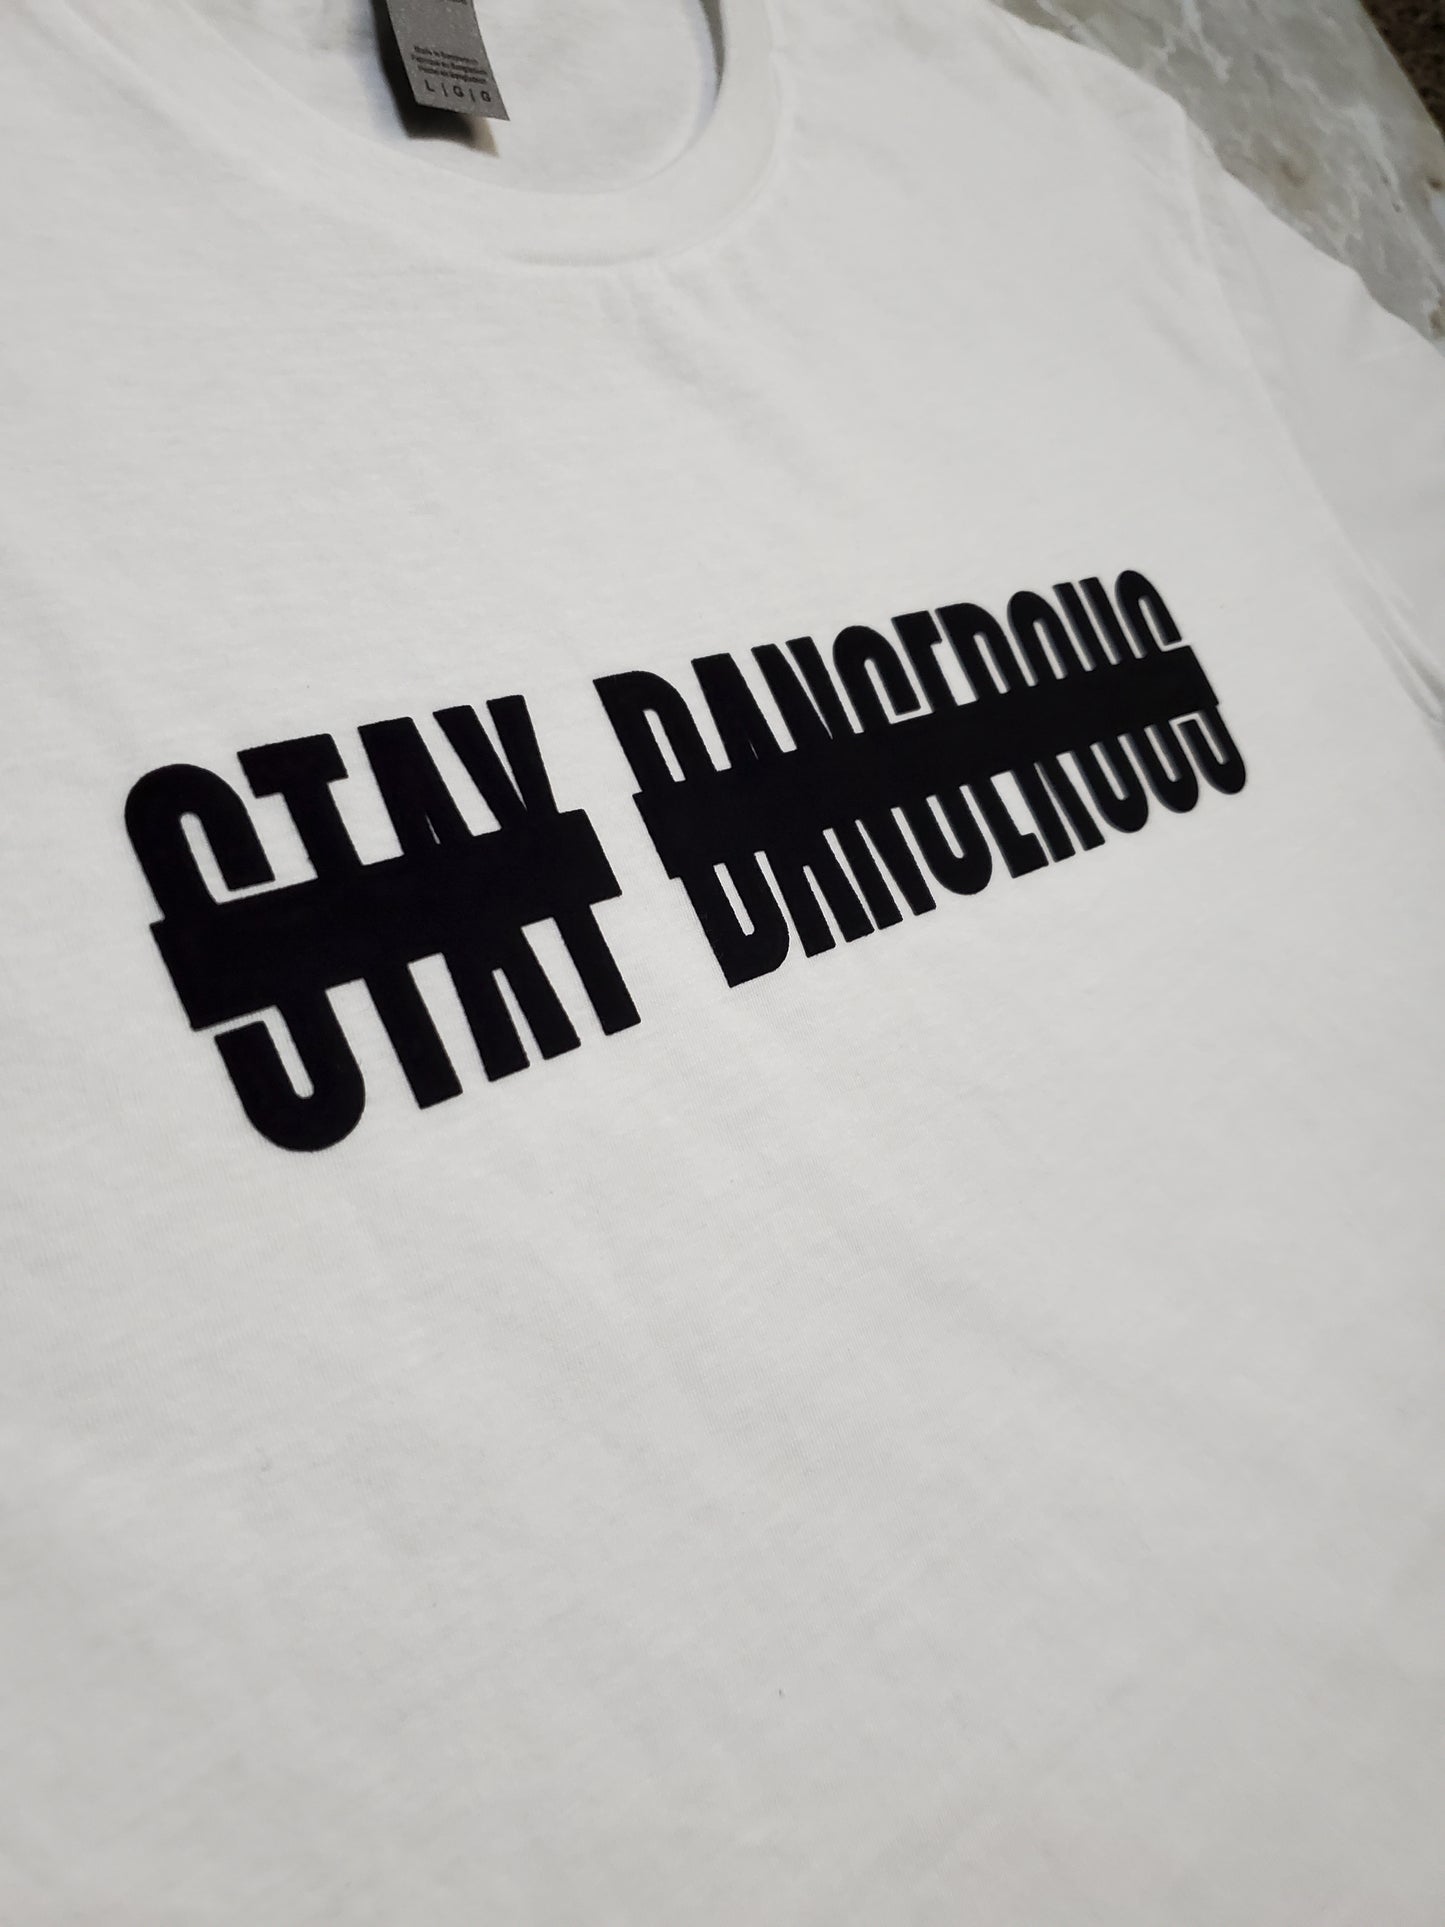 Stay Dangerous T-Shirt - Centre Ave Clothing Co.